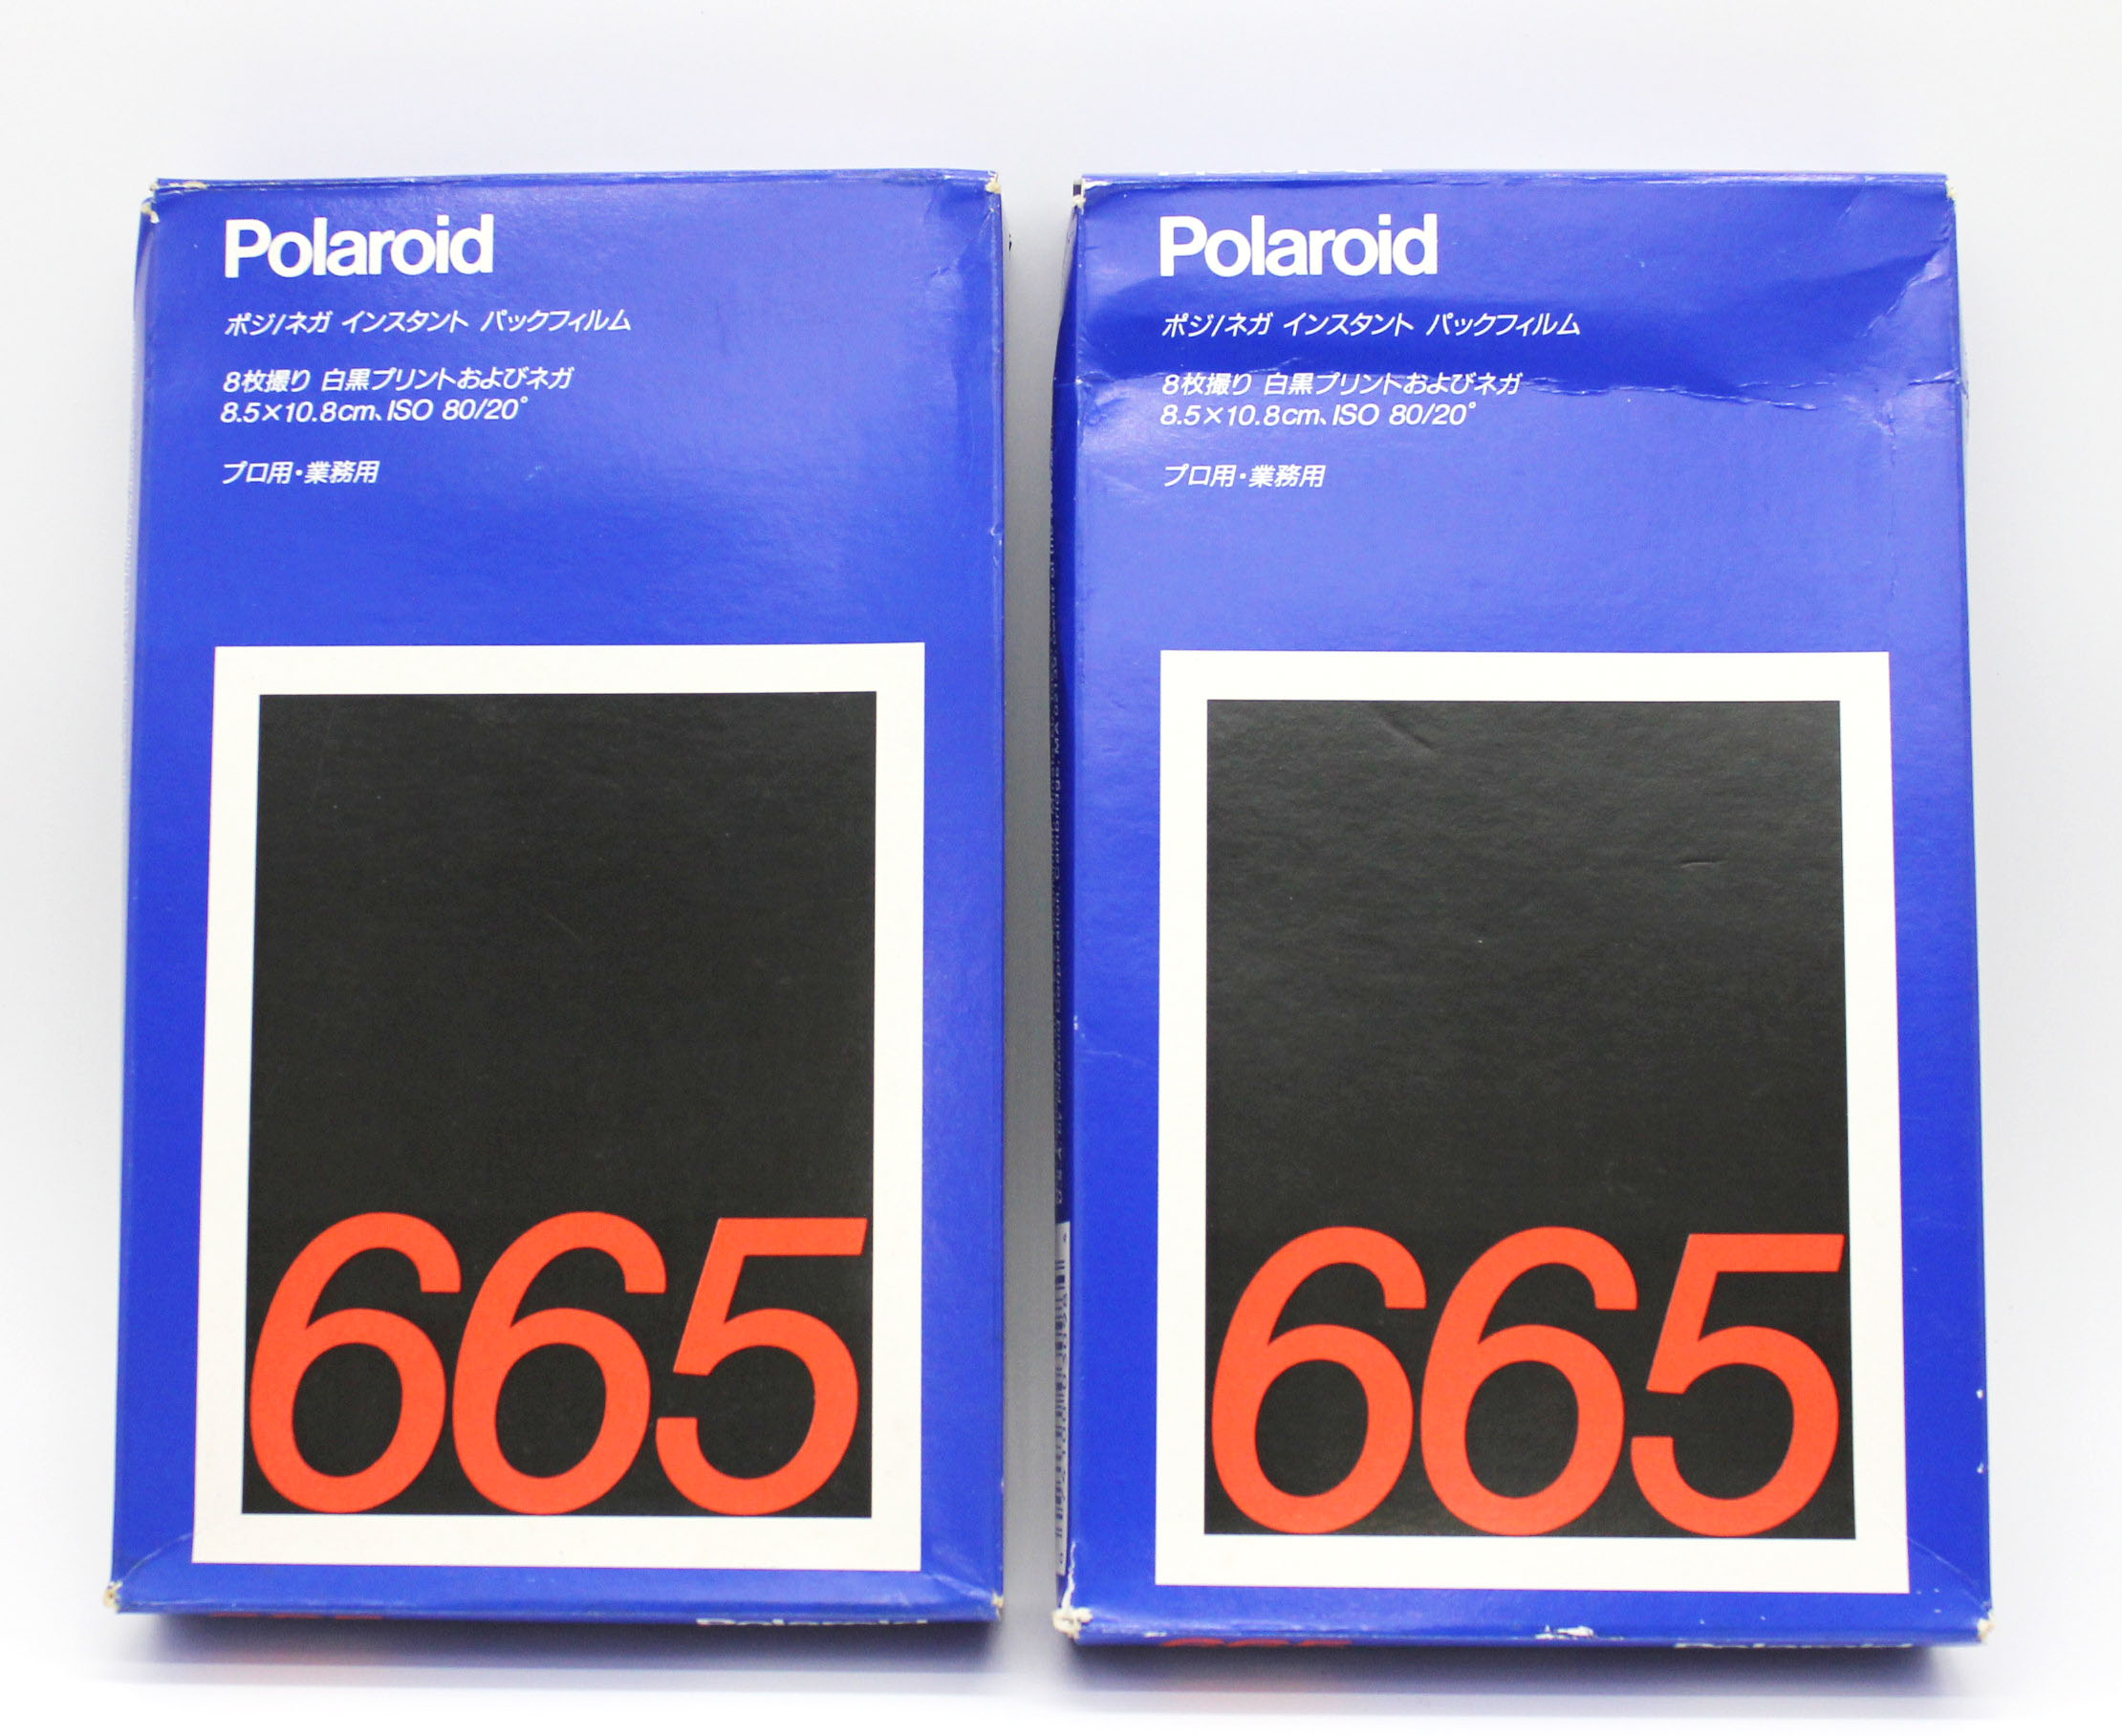 Japan Used Camera Shop | [Unused] Polaroid 665 Positive / Negative Instant Pack Film (2 Packs) Expired 11/1992 from Japan